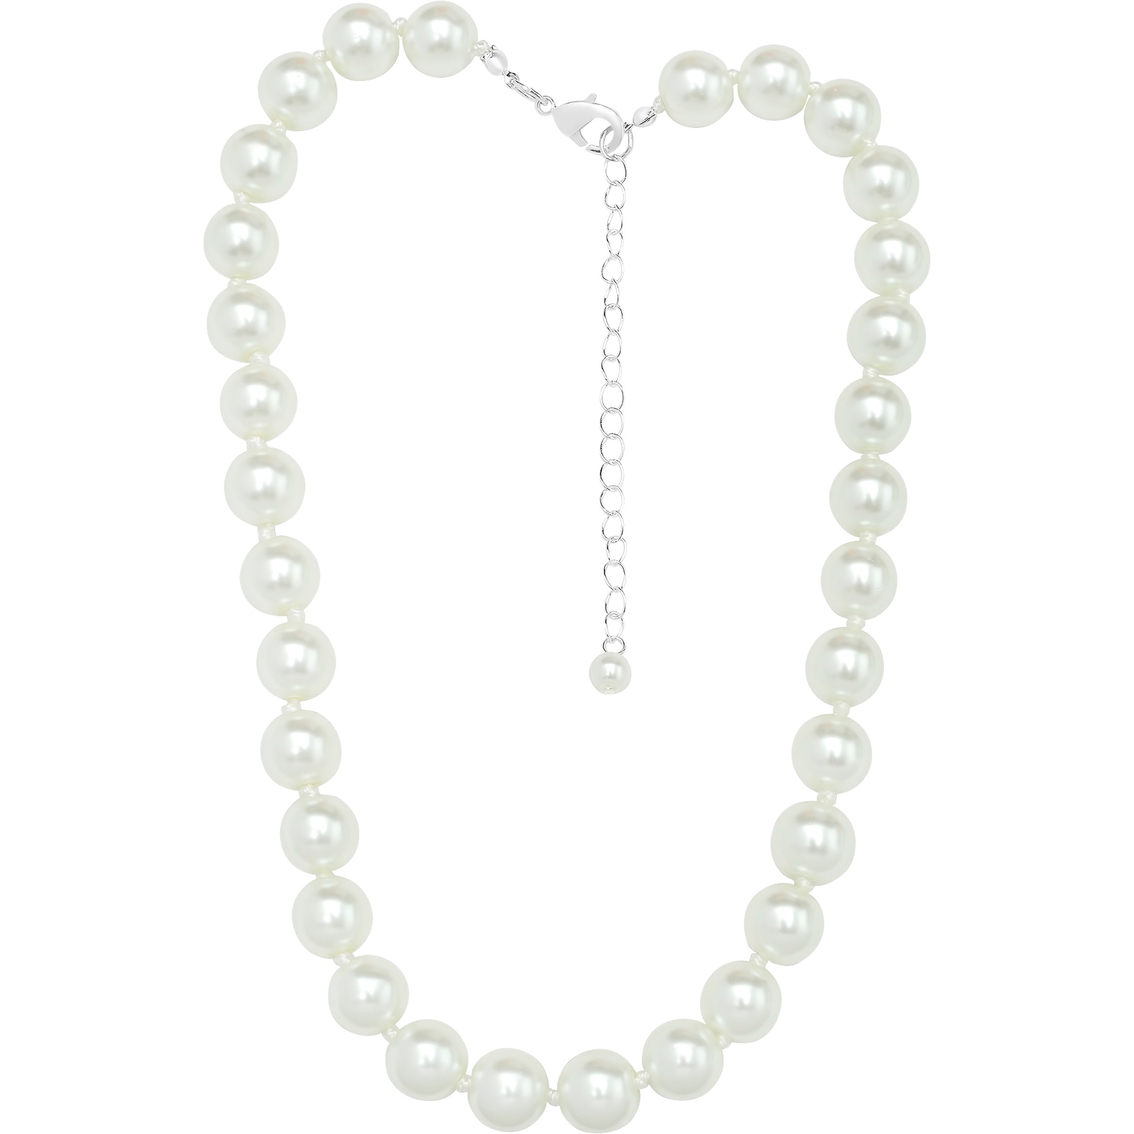 Cherish 12mm White Faux Pearl 18 In. Necklace | Fashion Necklaces ...